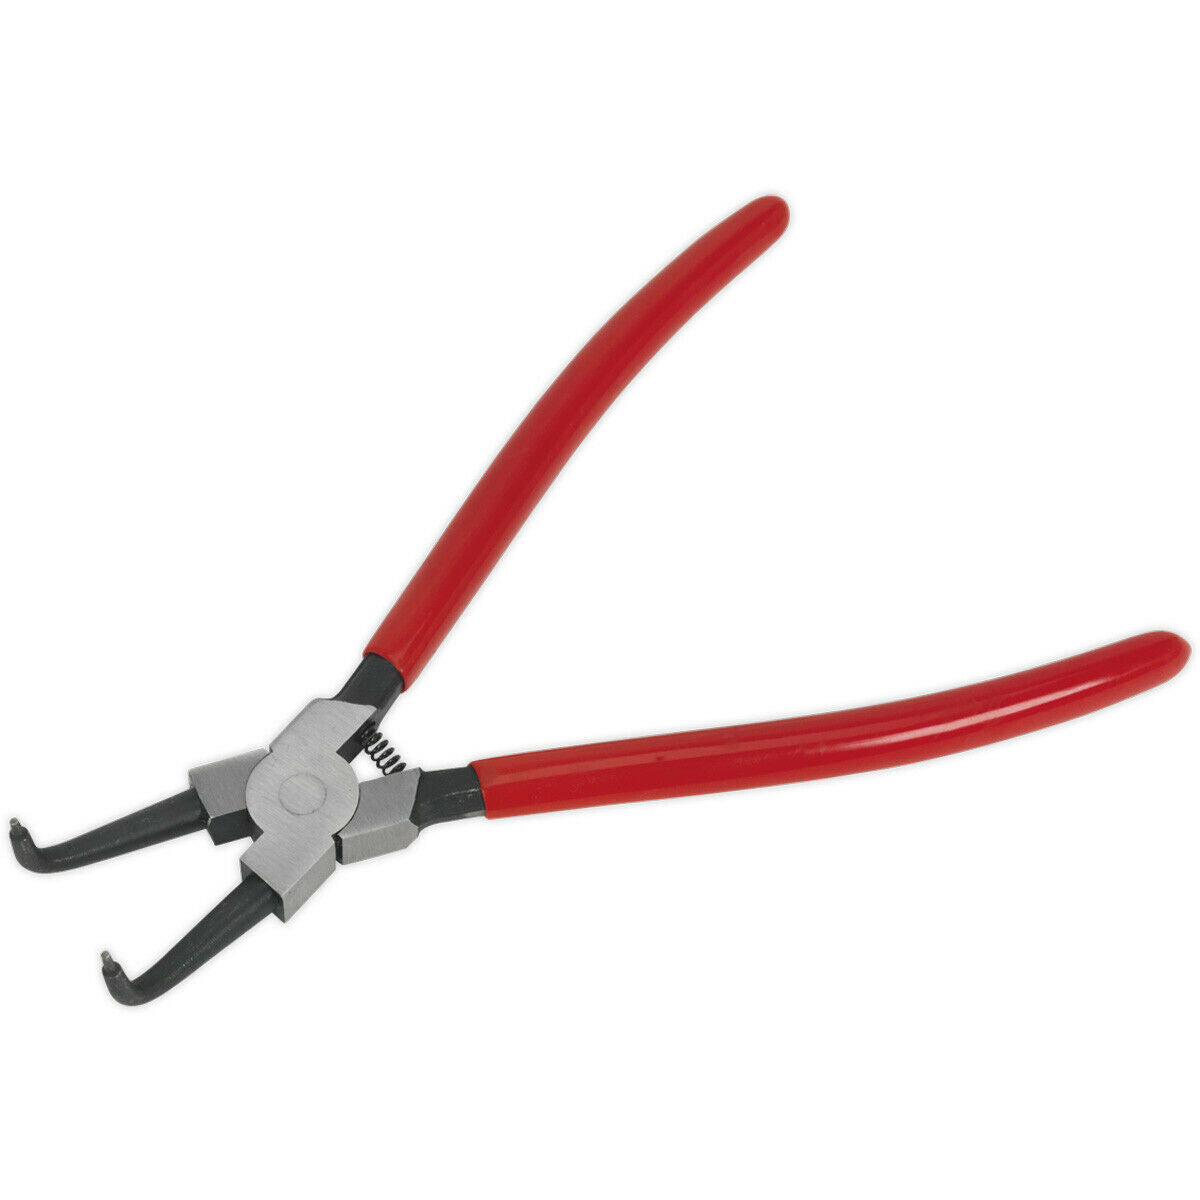 230mm Bent Nose Internal Circlip Pliers - Spring Loaded Jaws - Non-Slip Tips